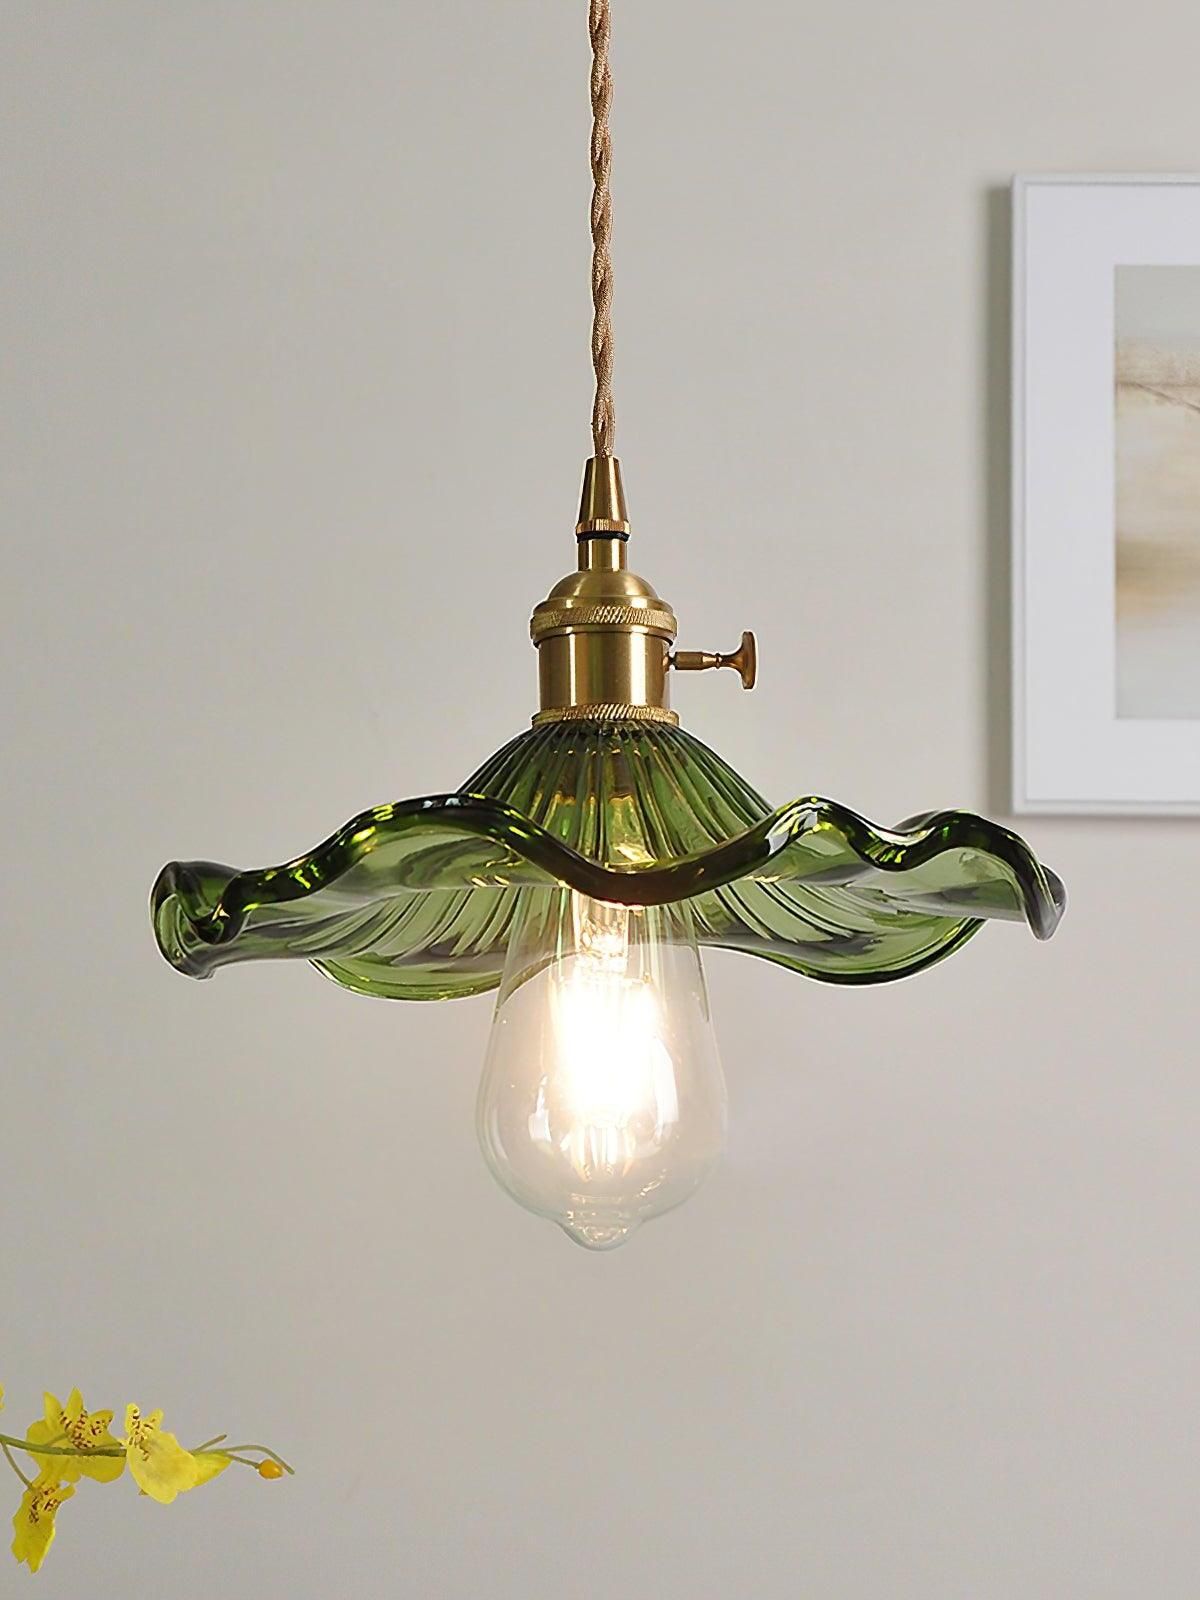 Lamps And Lighting Fixtures Brighten Up Your Home with Stylish Illumination Options